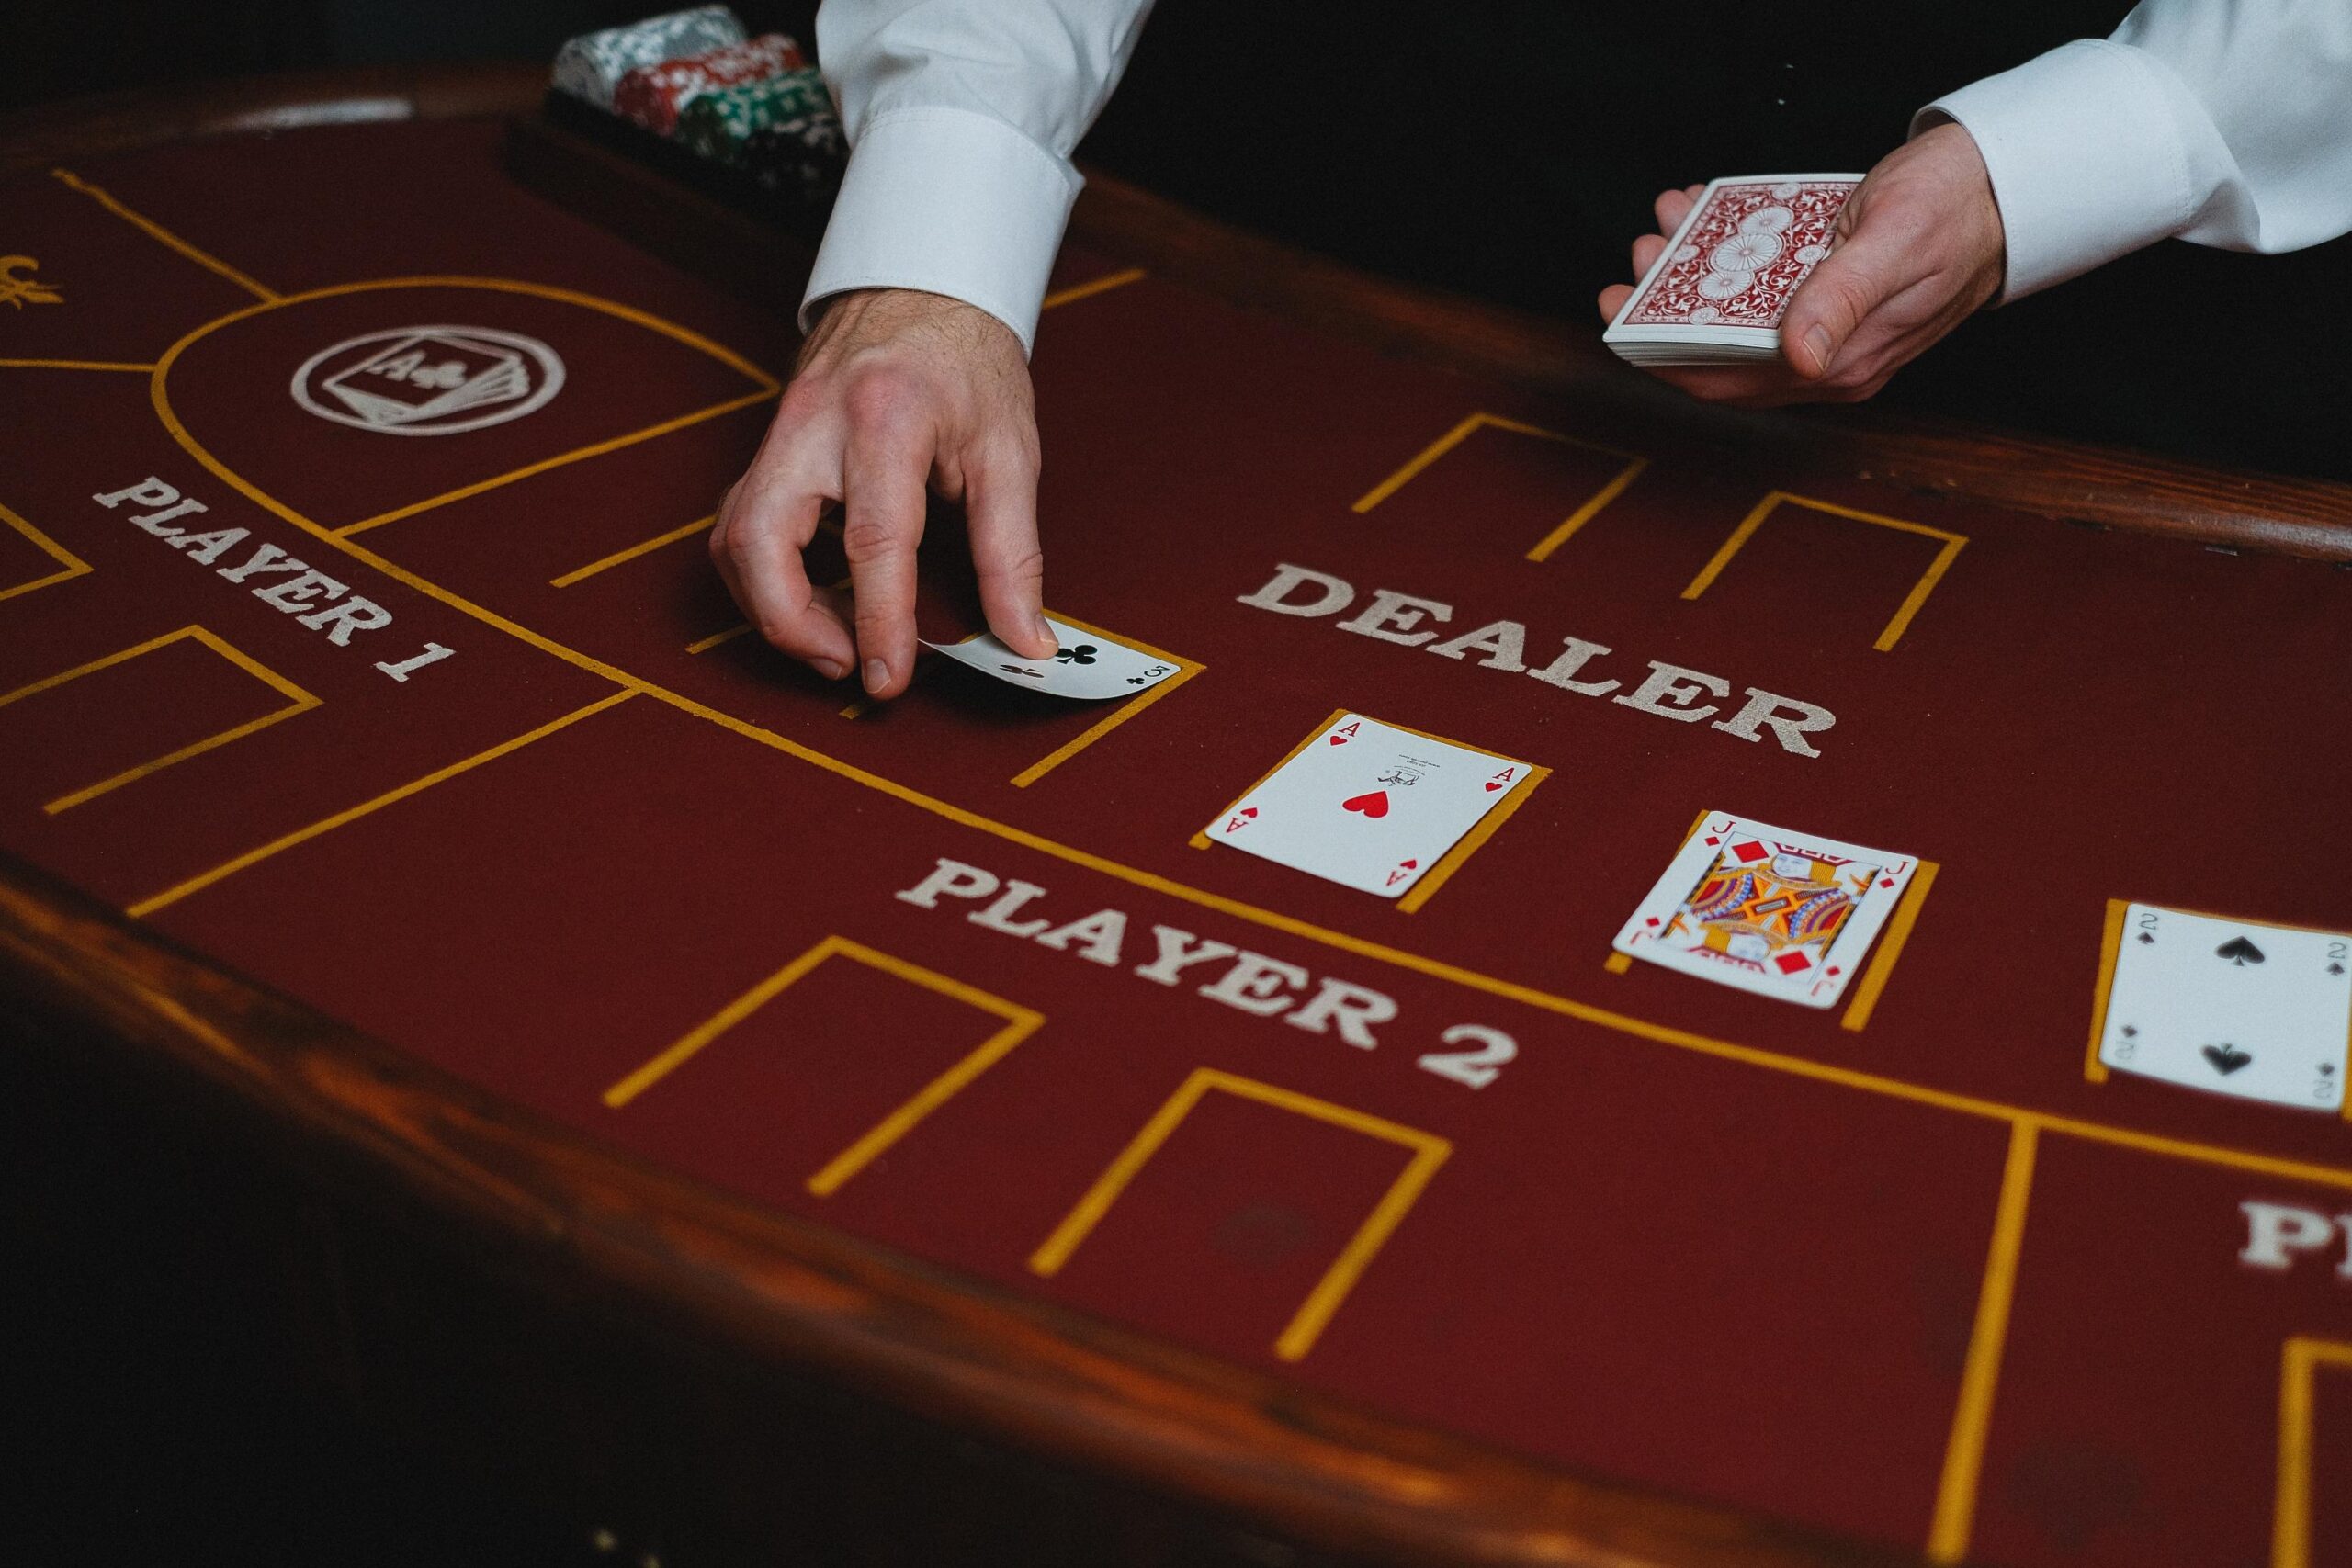 “Mastering Jilibet: A Guide to Winning at Online Casino Gaming”